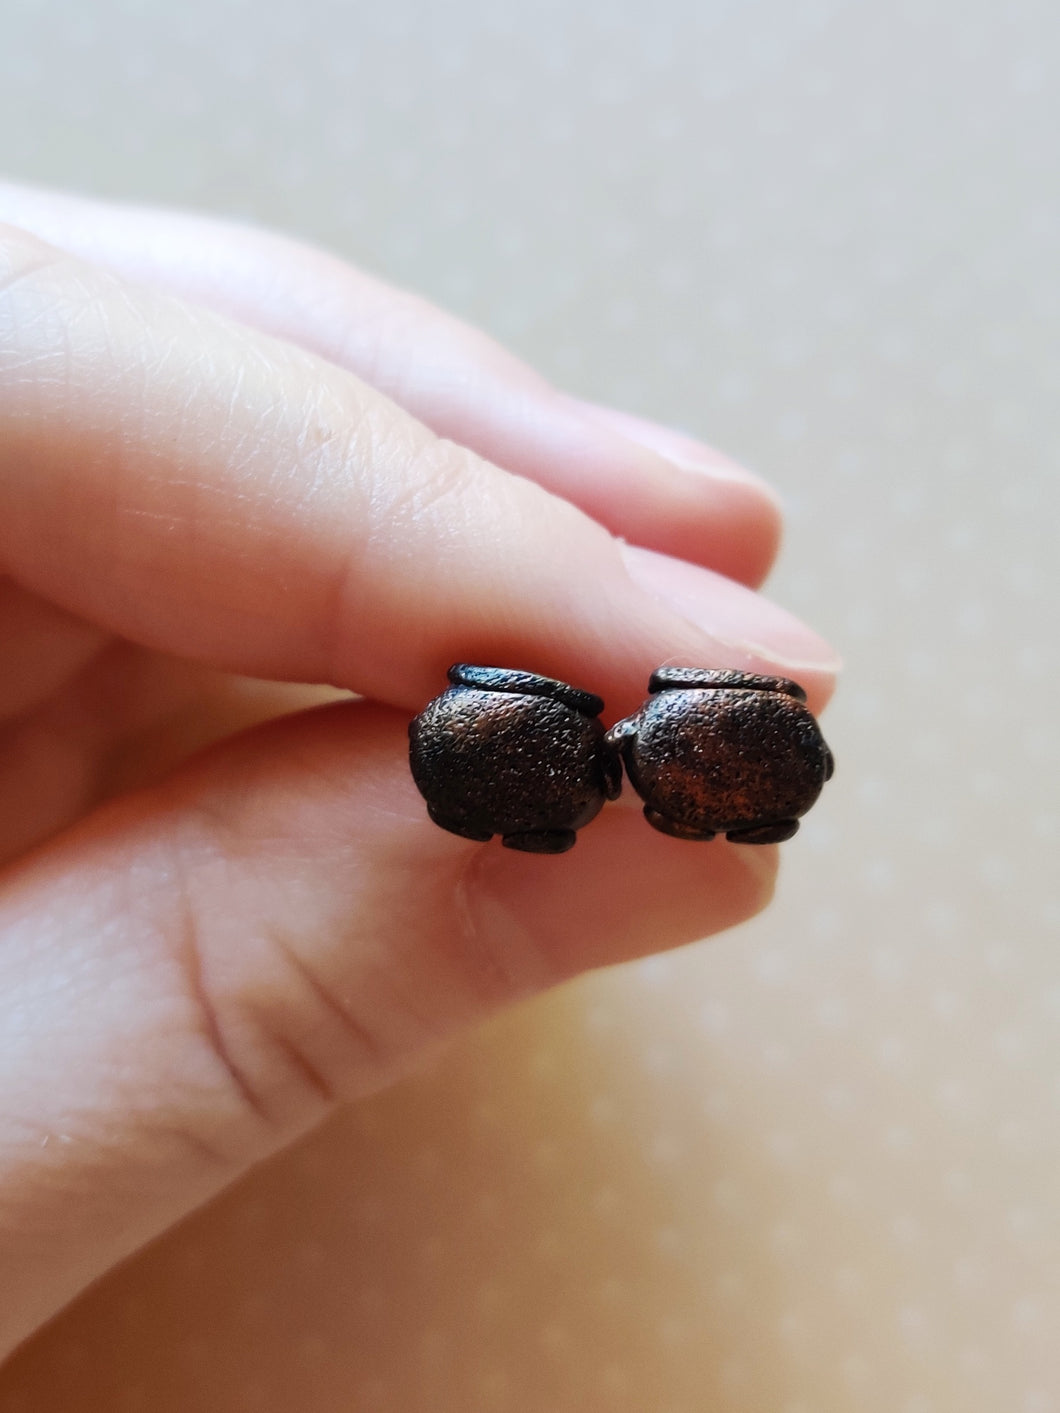 Two miniature flat backed cauldron earrings in black, brushed with a bronze colored metallic pigment. Earrings are held between finger and thumb.